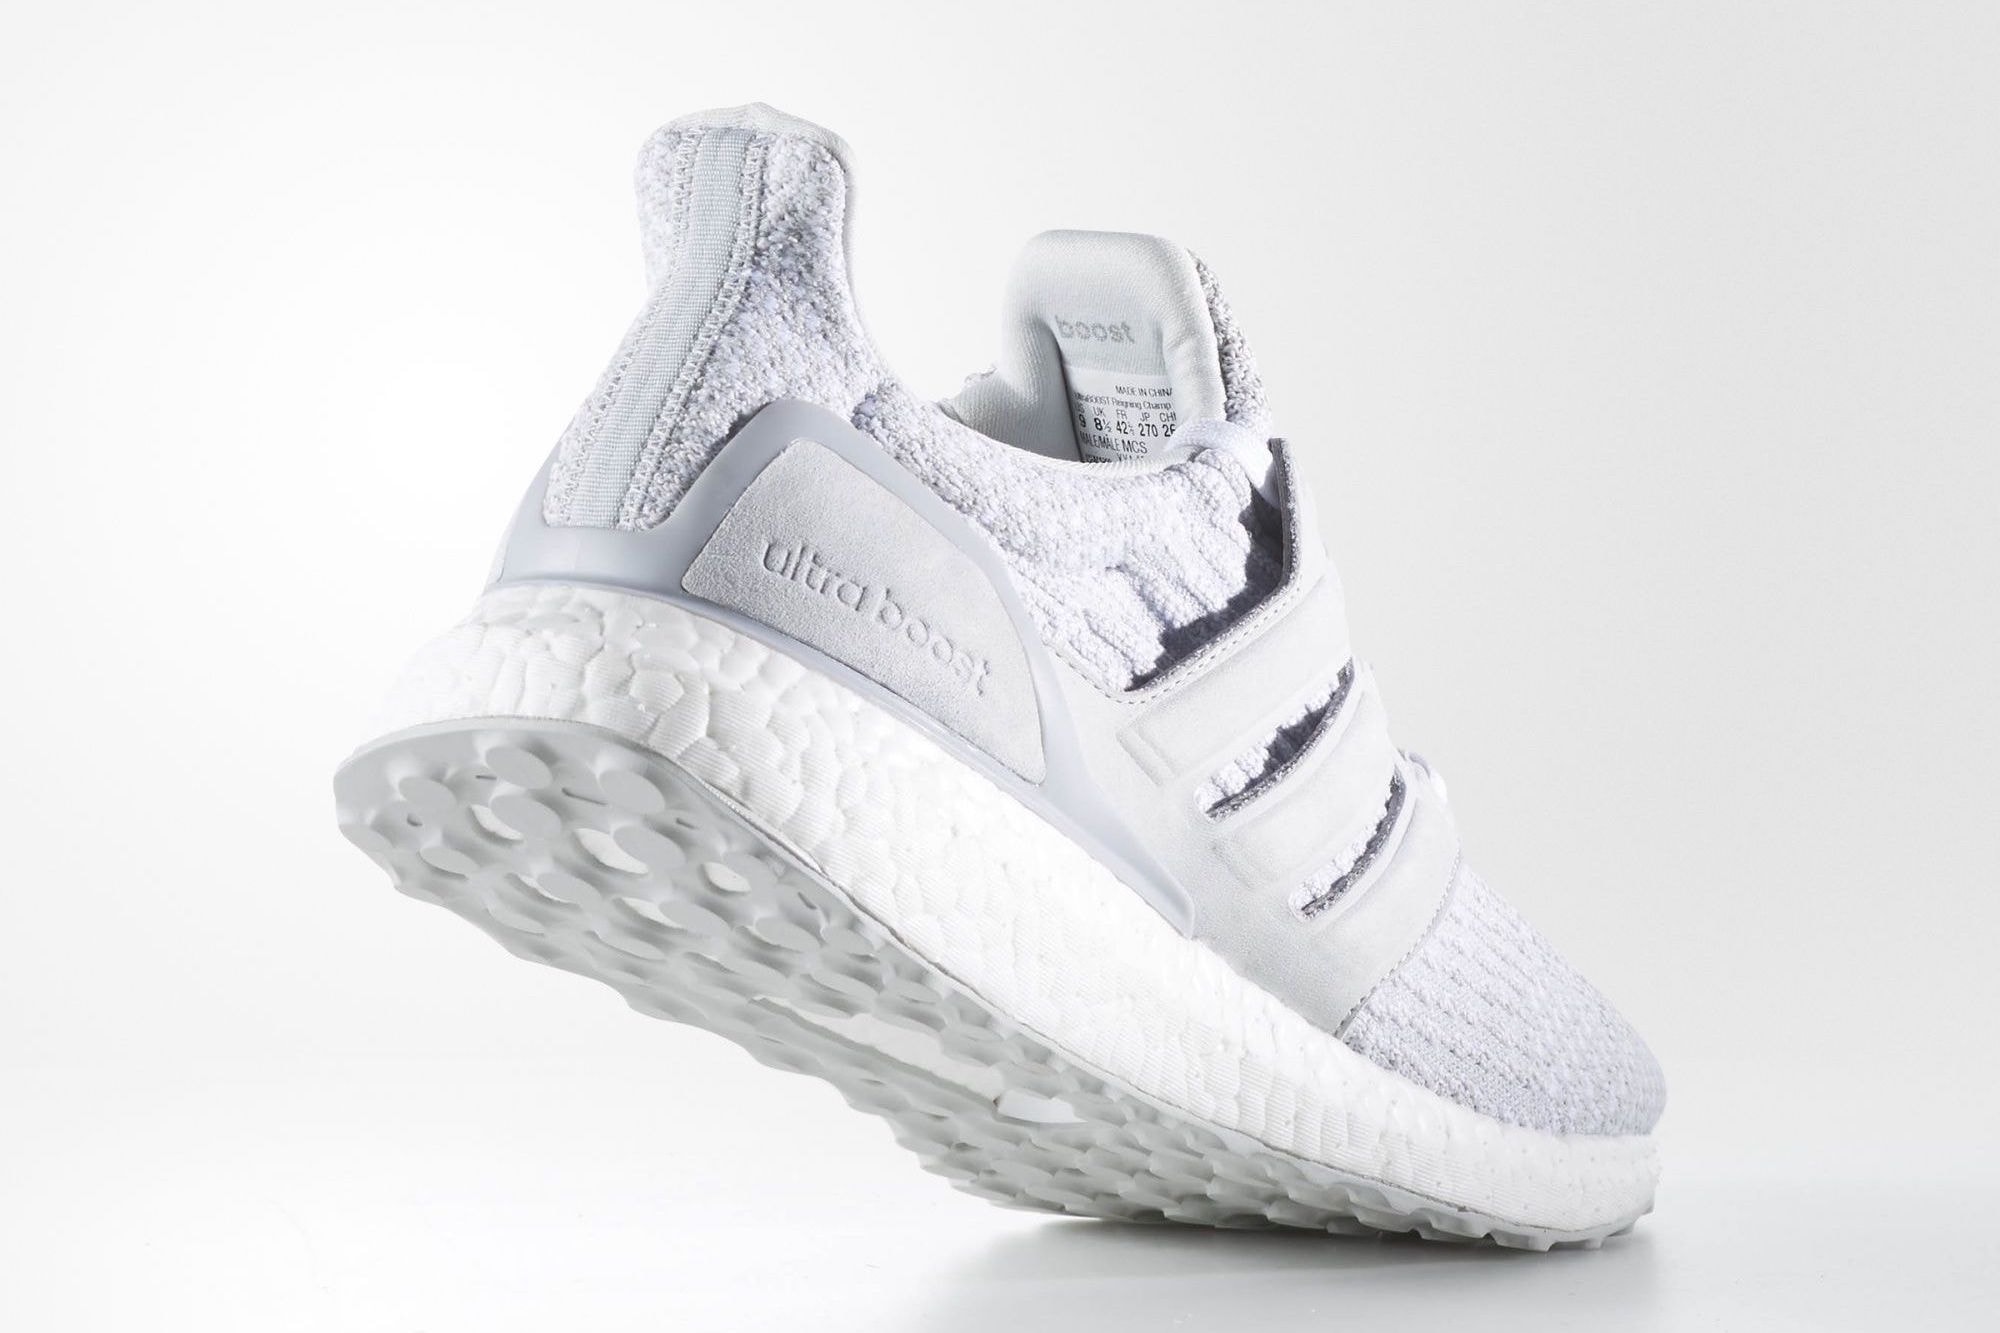 Reigning Champ x adidas 2017 UltraBOOST 3.0 Official Look